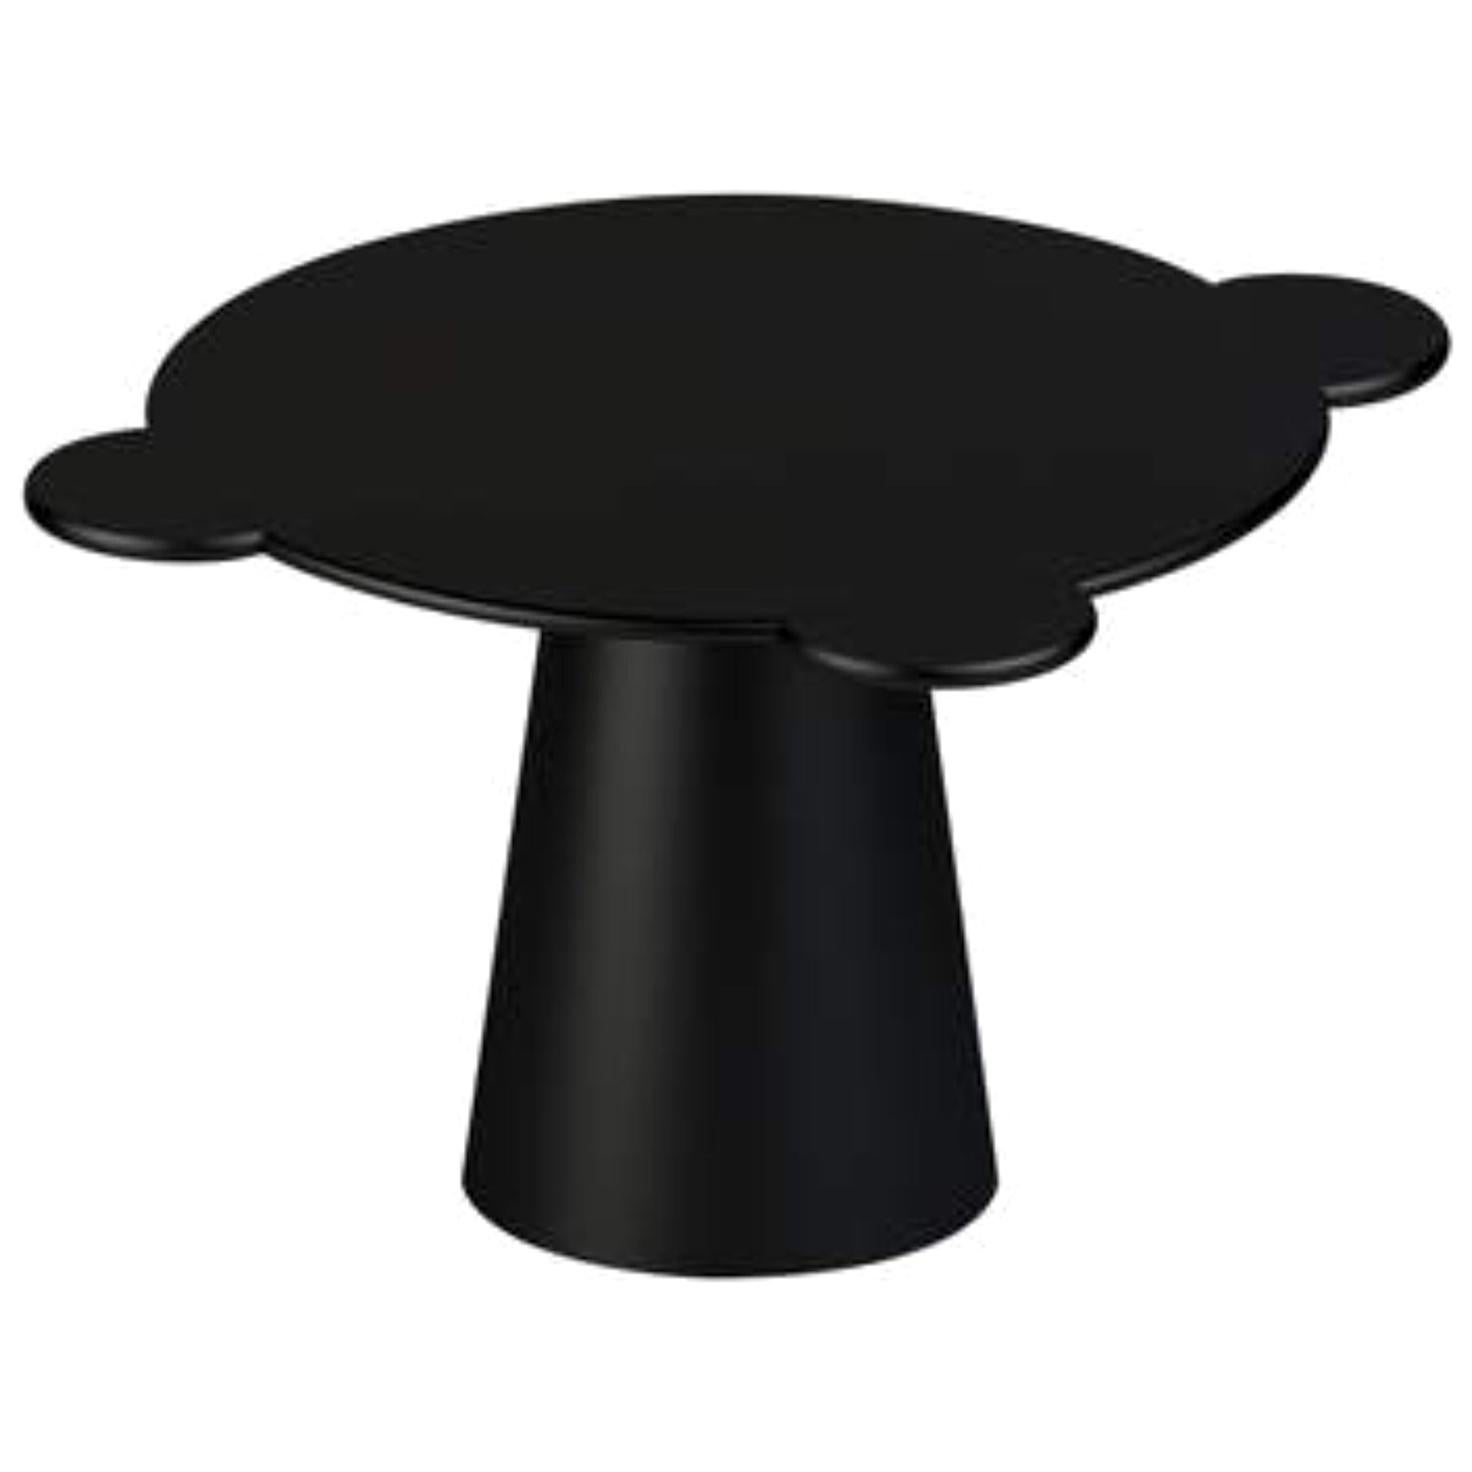 Black Lacquered Wood Contemporary Donald Table by Chapel Petrassi